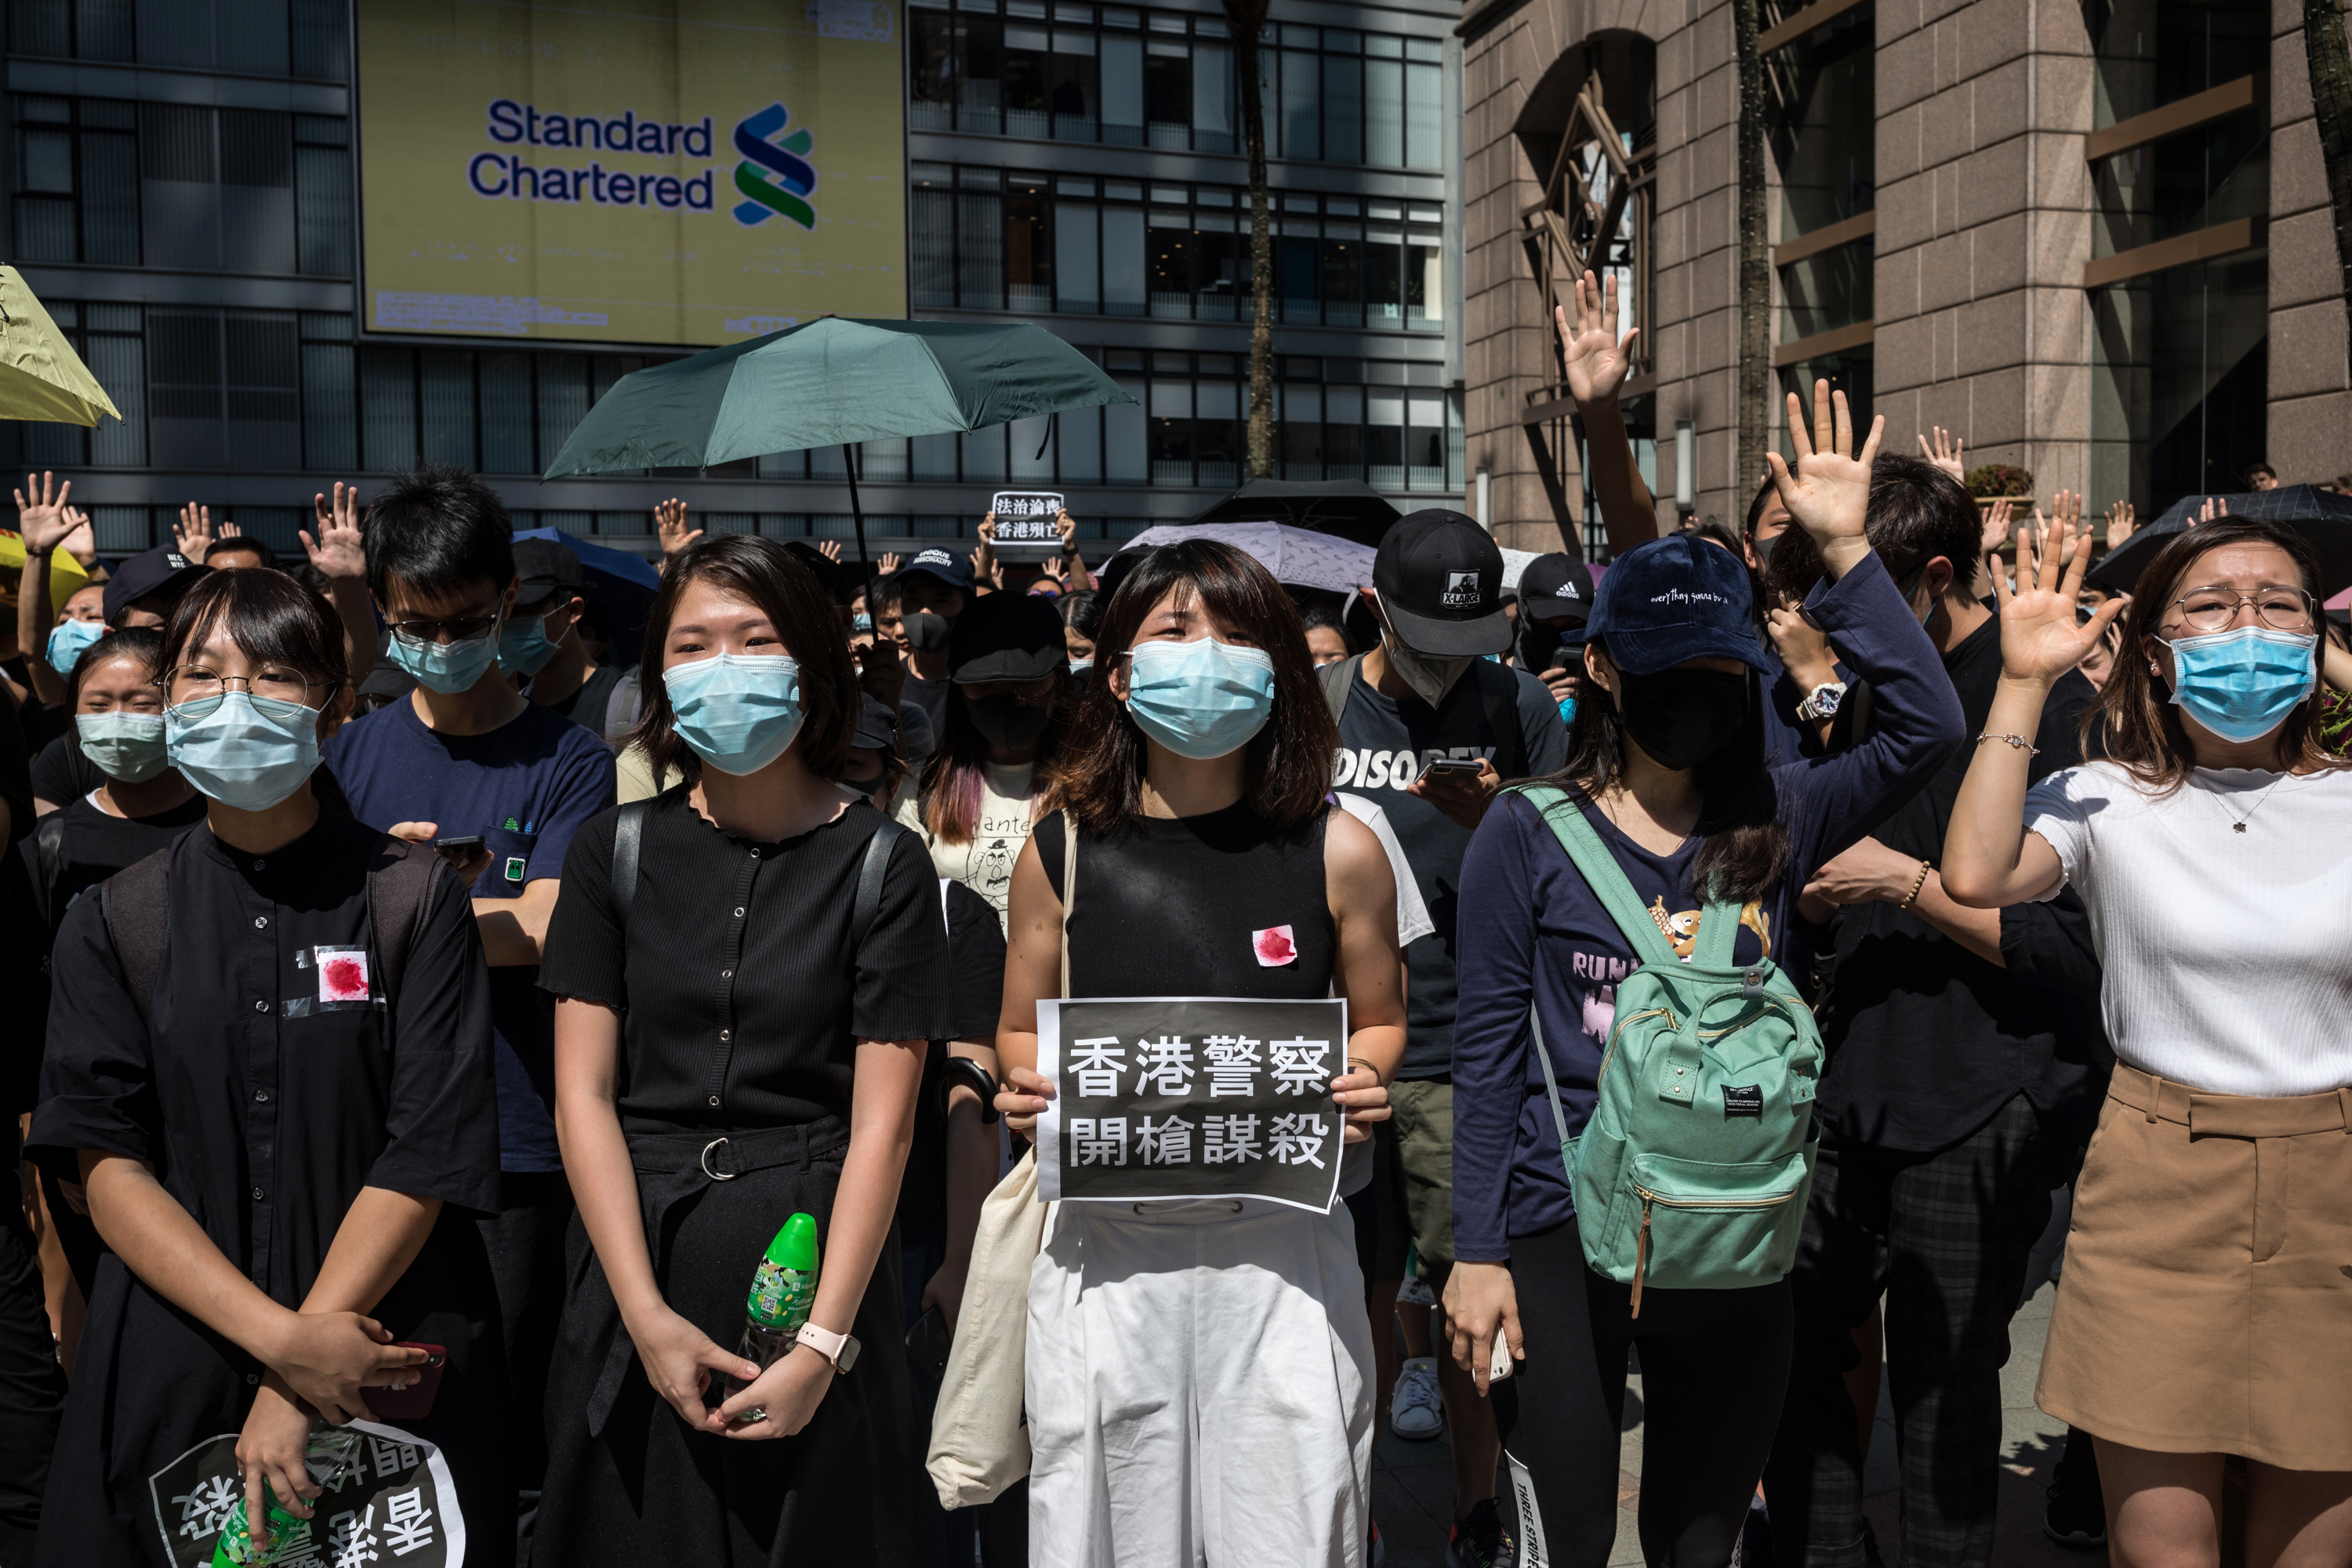 A demonstrator holds a sign with Chinese characters reading "Hong Kong Police, Murder With Gunfire" as other protesters gesture "Five Demands" during a flash mob in the Sheung Wan district of Hong Kong, China, on Wednesday, Oct. 2, 2019. (Nicole Tung/Bloomberg via Getty Images)